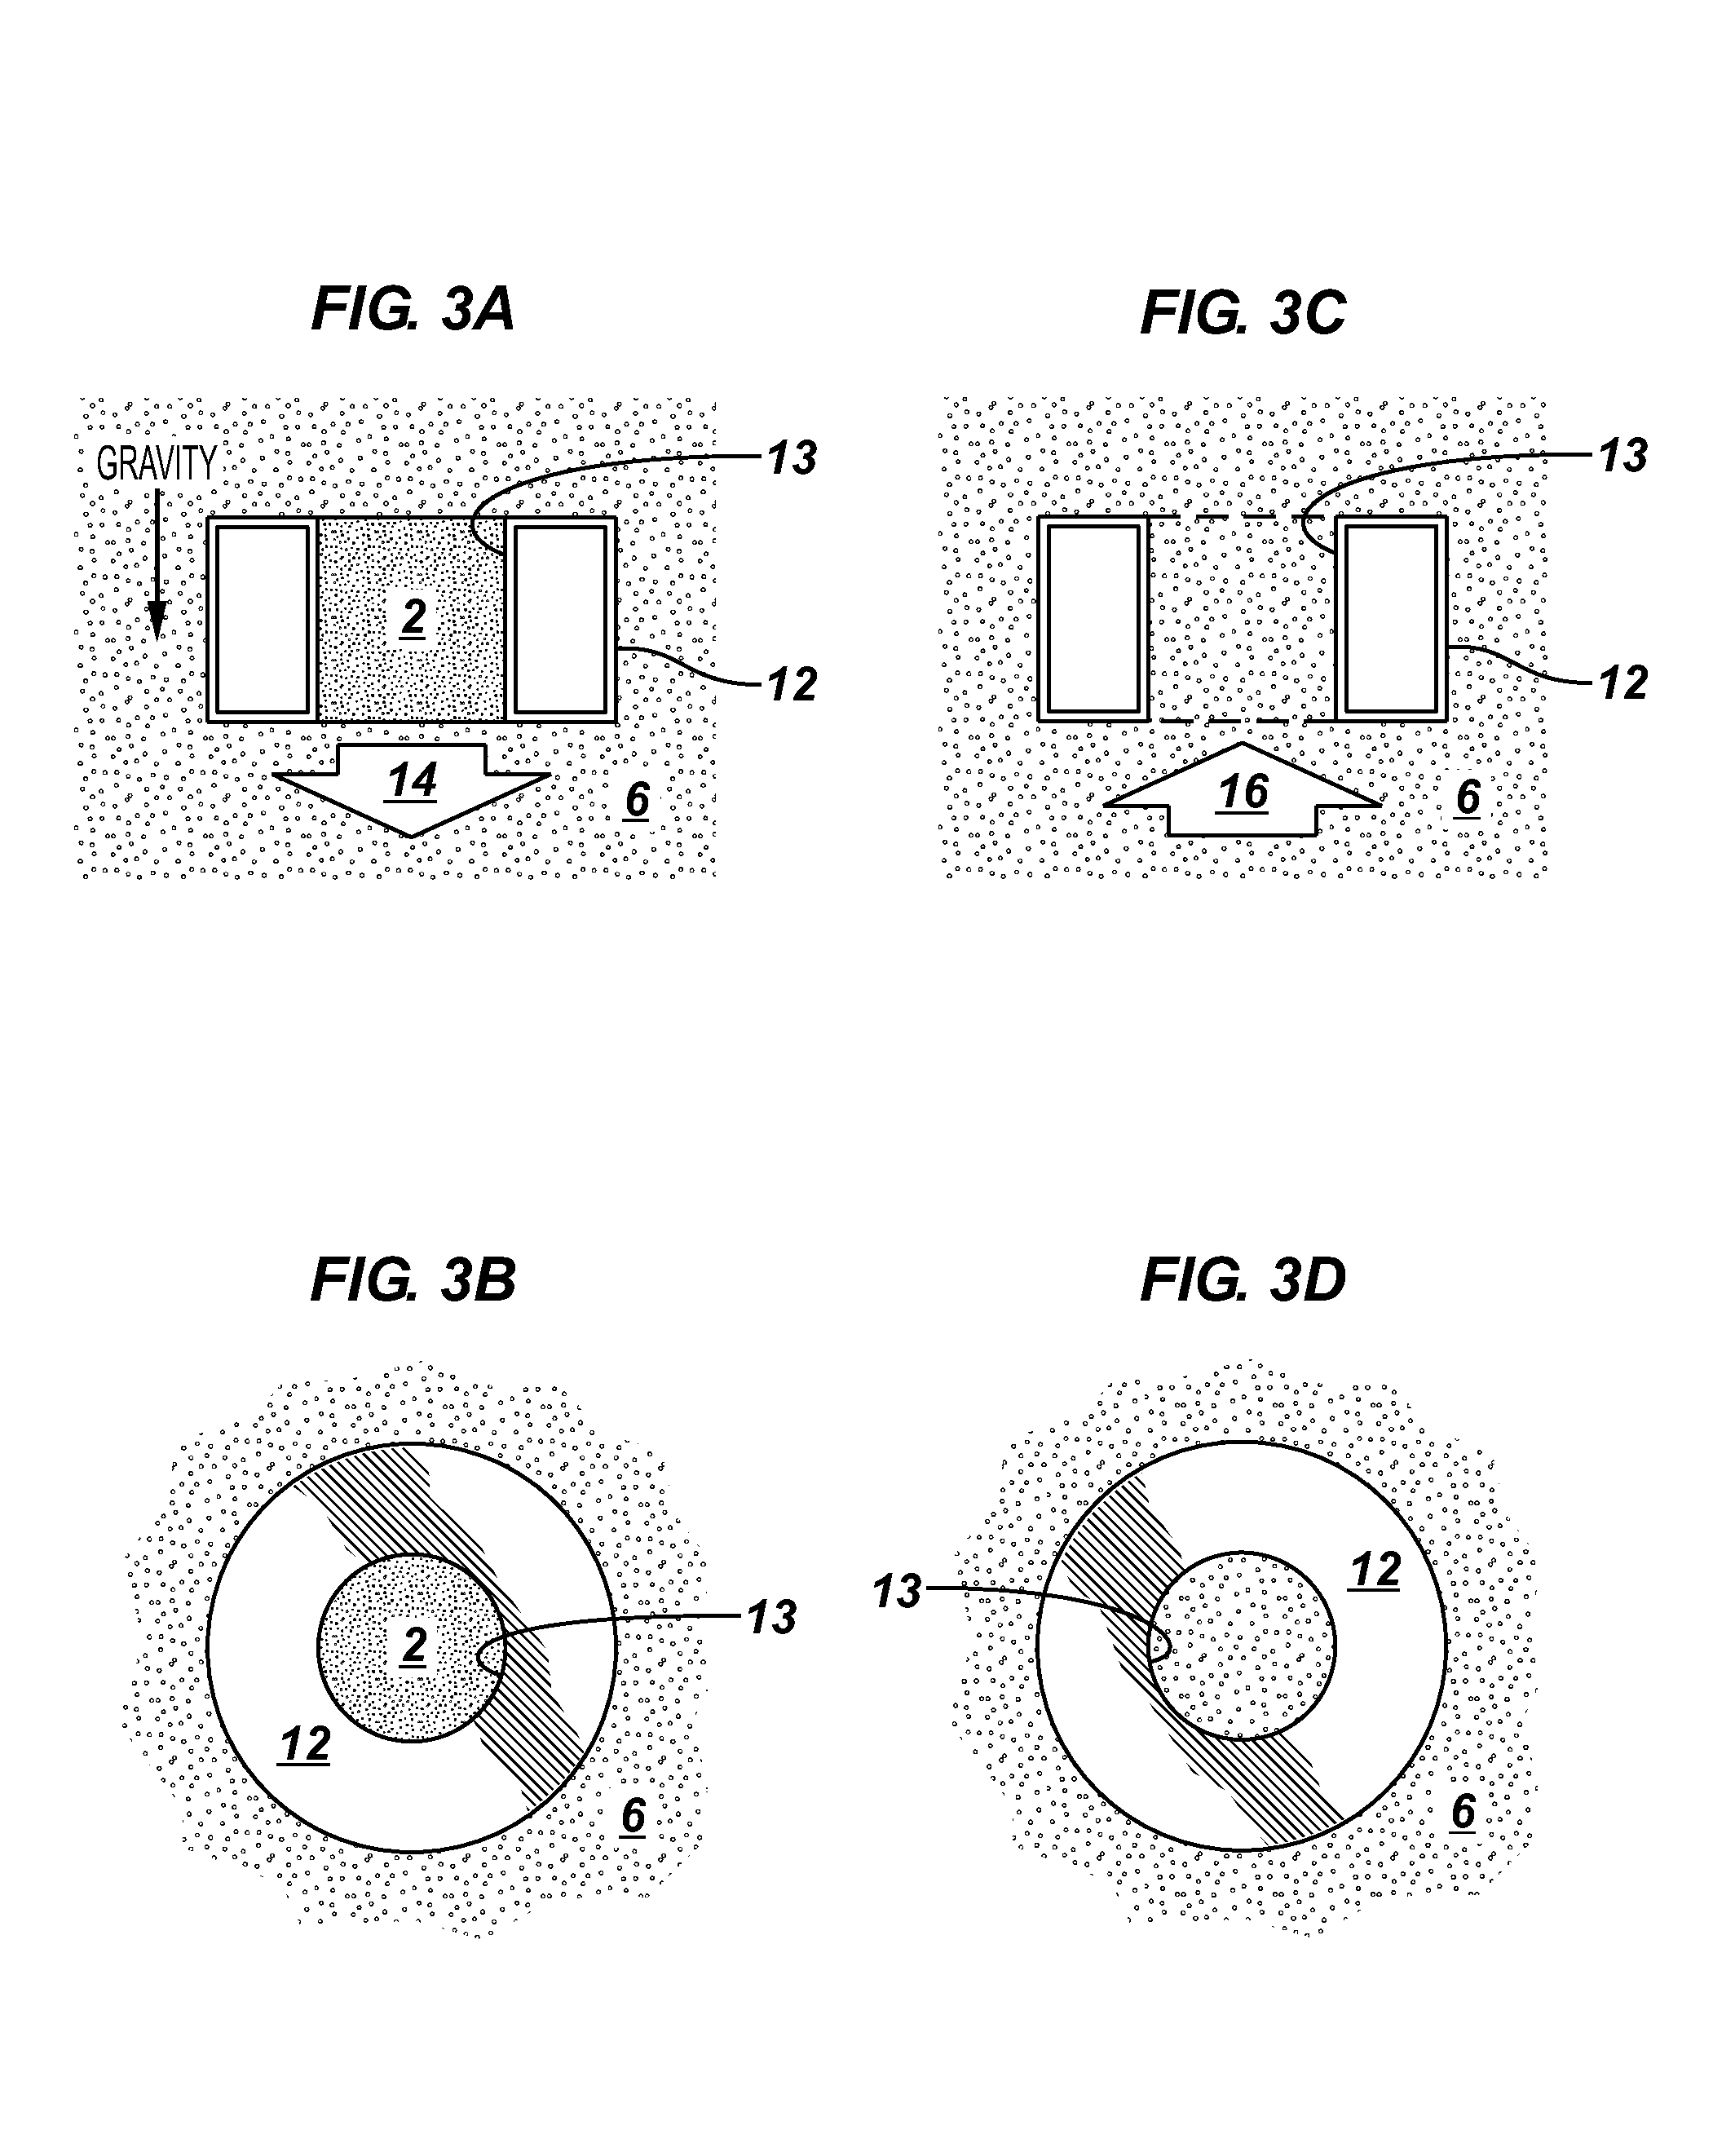 Degradable compositions, apparatus comprising same, and methods of use